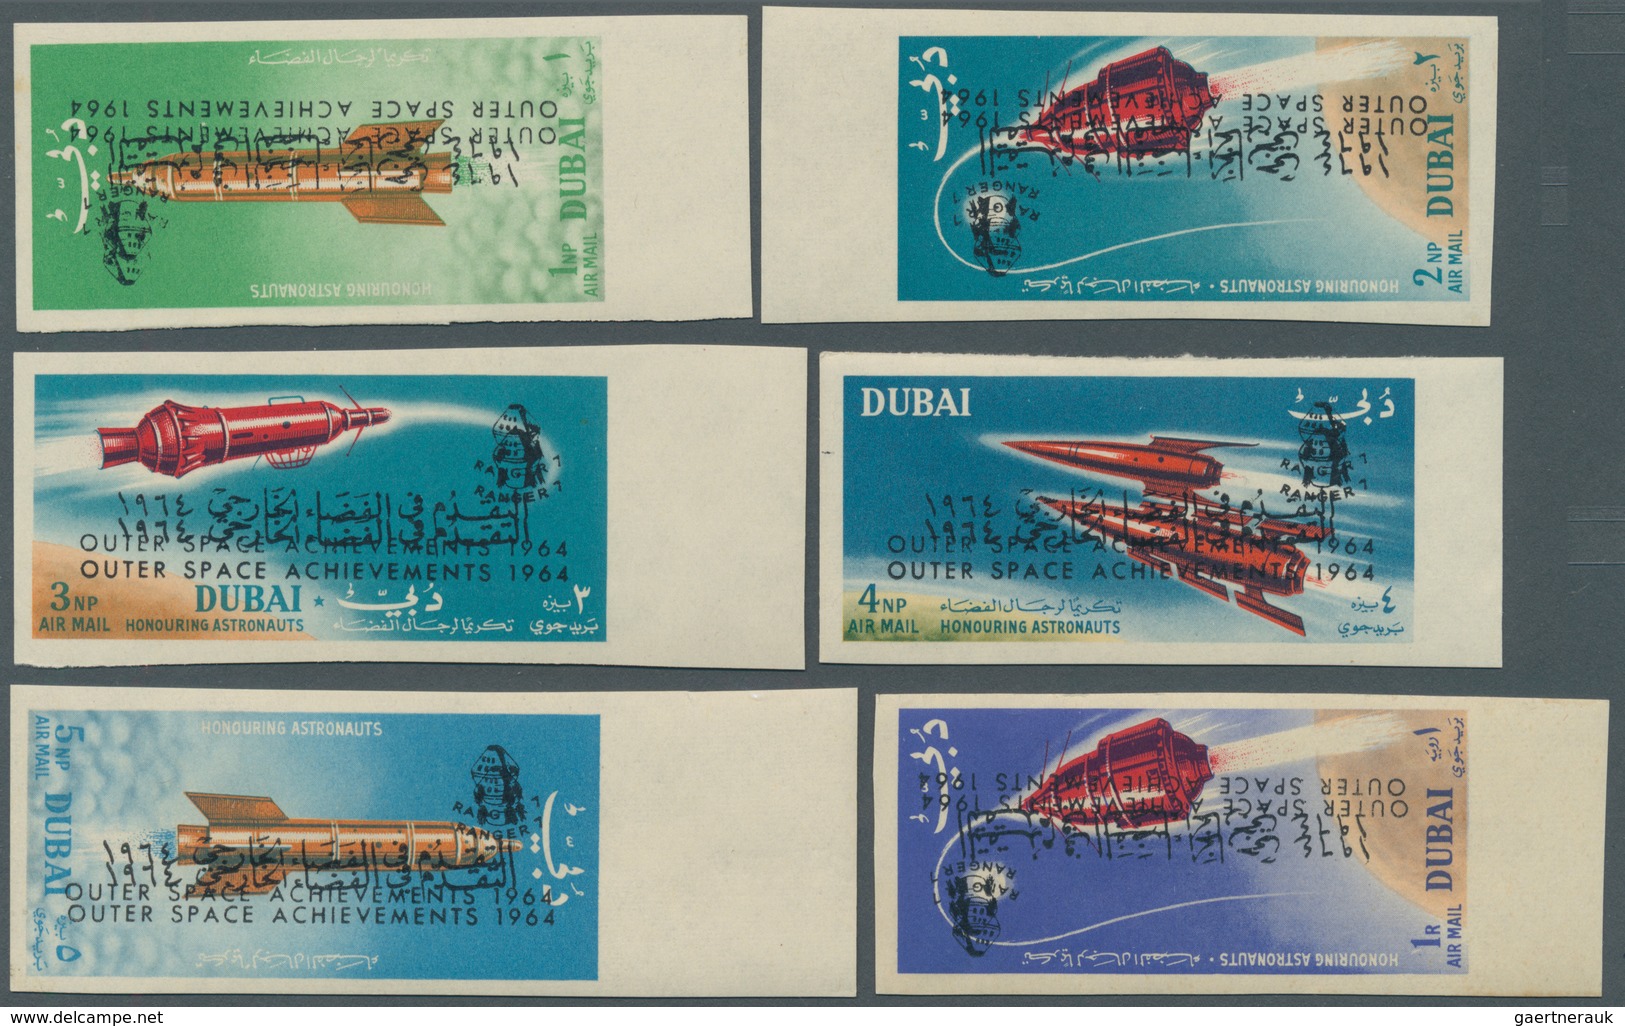 Naher Osten: 1948/1981, Arab states, specialised assortment incl. varieties, imperf. proofs etc.; co